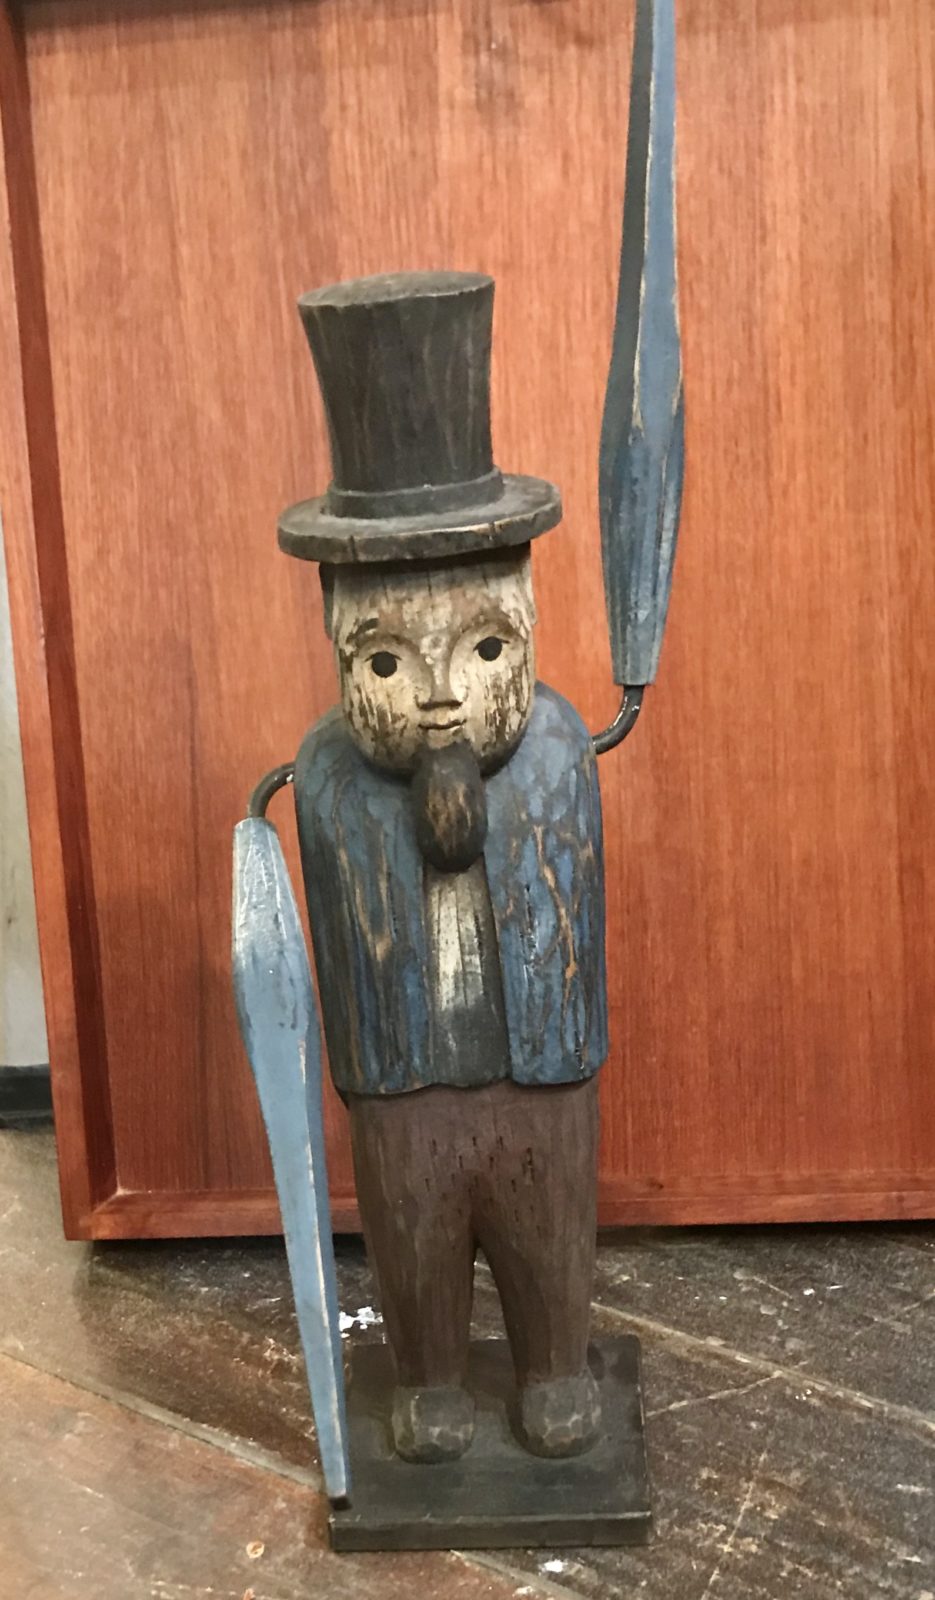 Abe Lincoln primitive whirligig • Sold! 
We are always on the lookout for unusual and different vintage items like this. If you’re looking for something special, we can reach out to our contacts. If you have something you’d like to sell, contact us! We’d love to make you an offer!